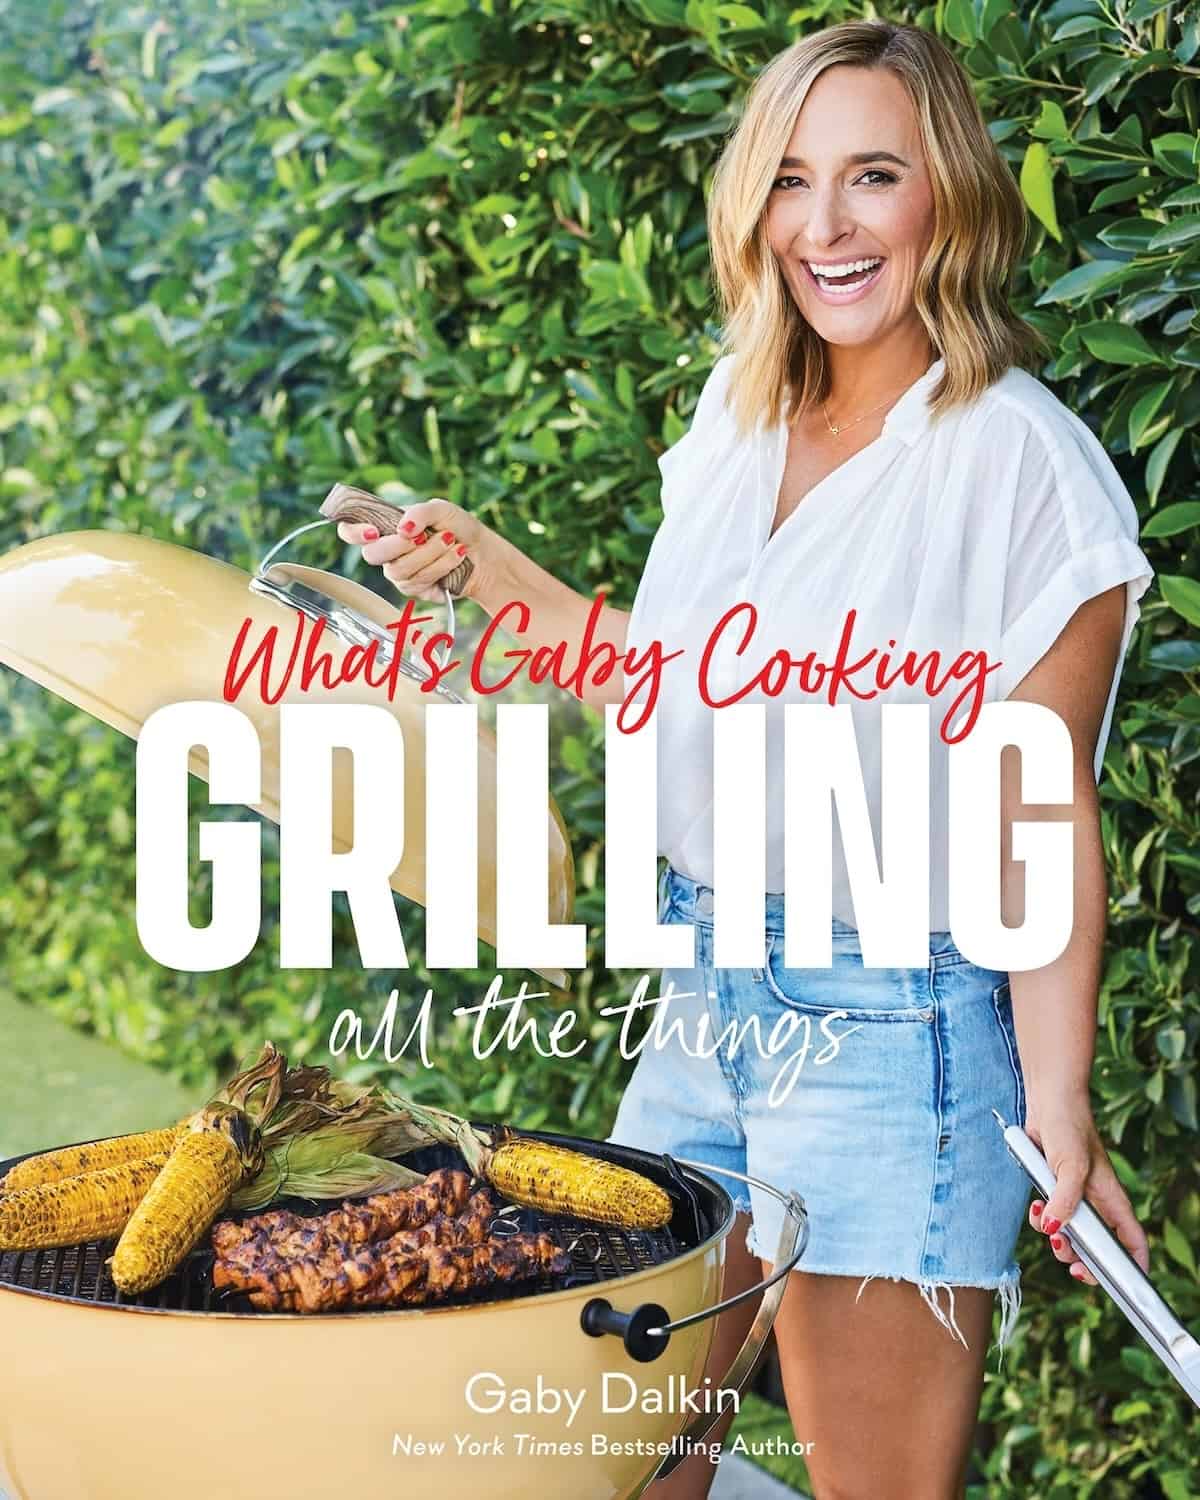 Cookbook #5 // Grilling All The Things IS OUT!!